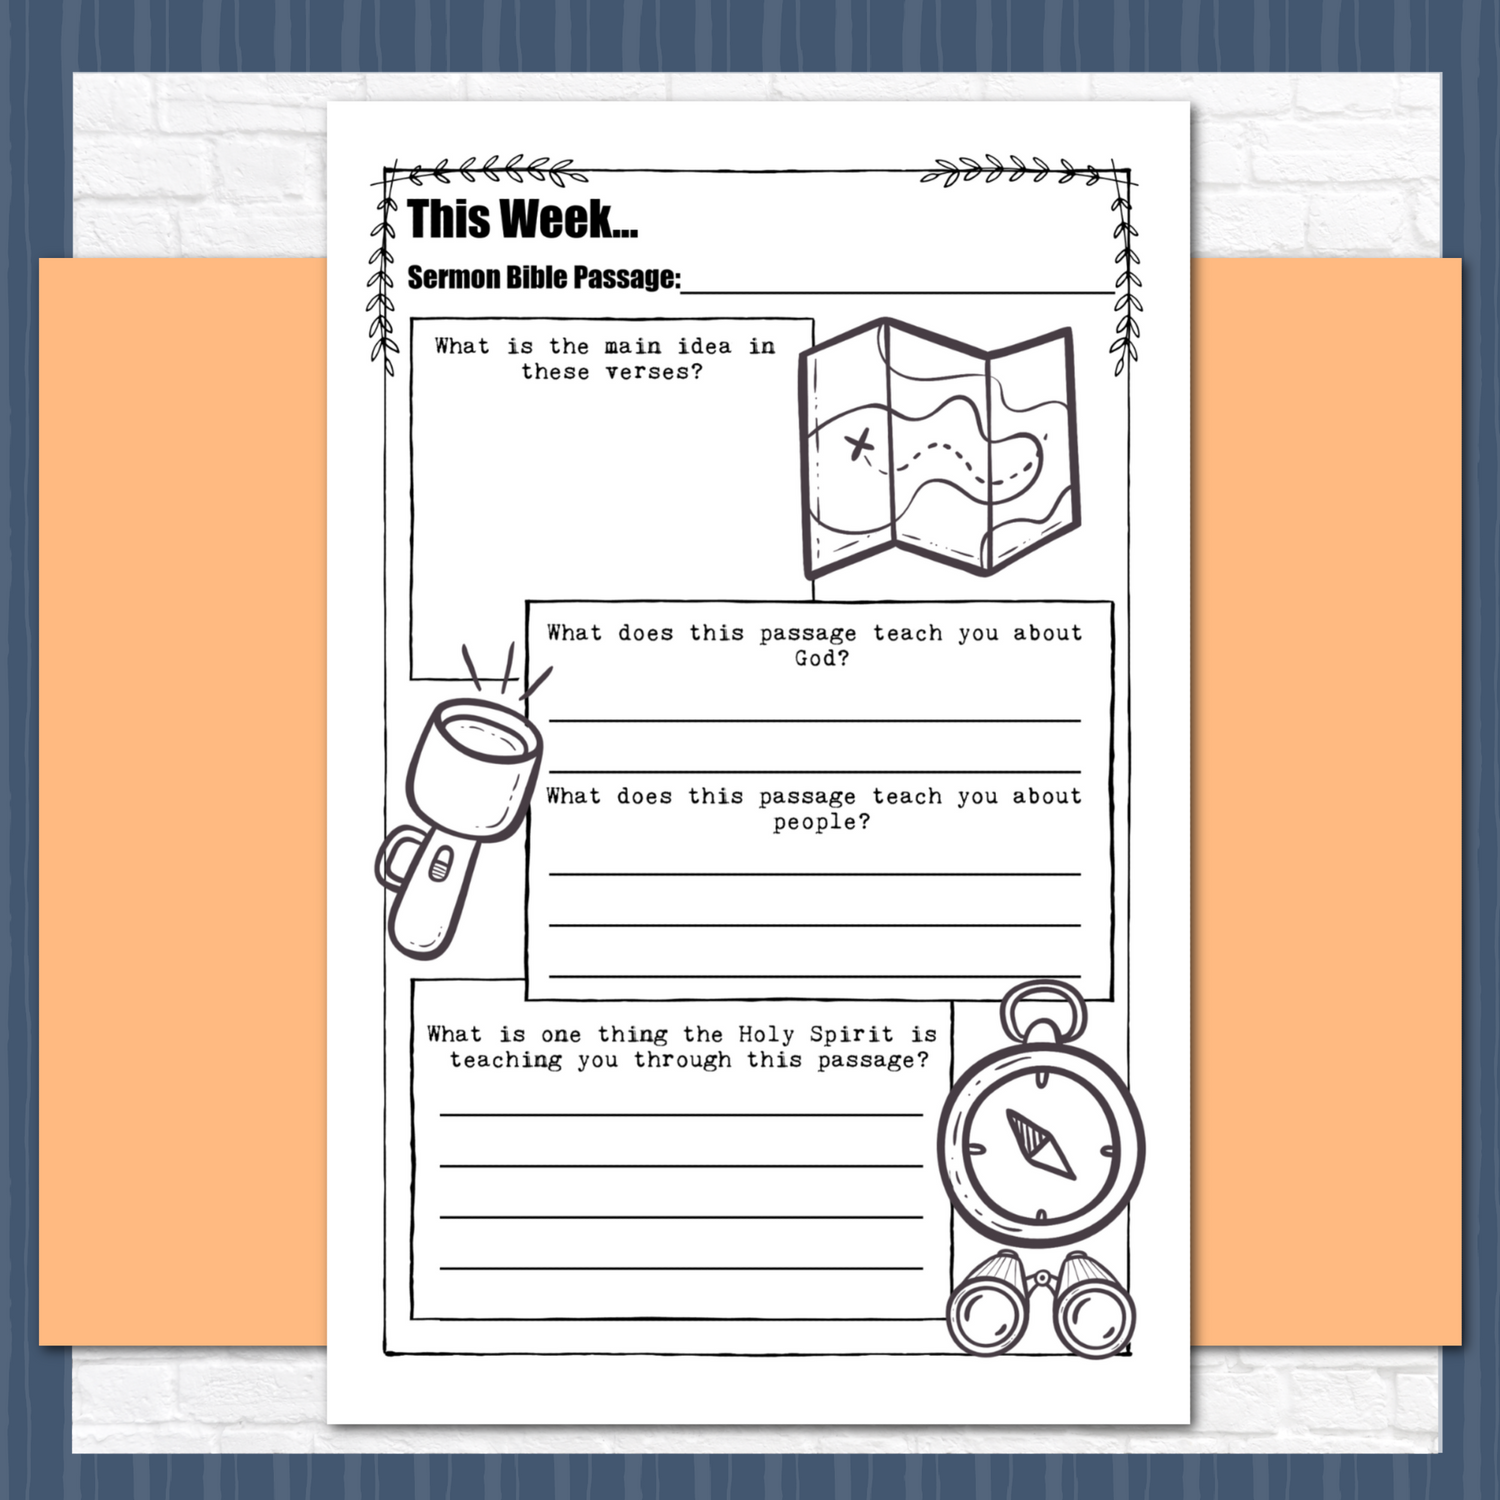 Doodle Sermon Notes for Tweens, Teens, and Adults, Instant Download